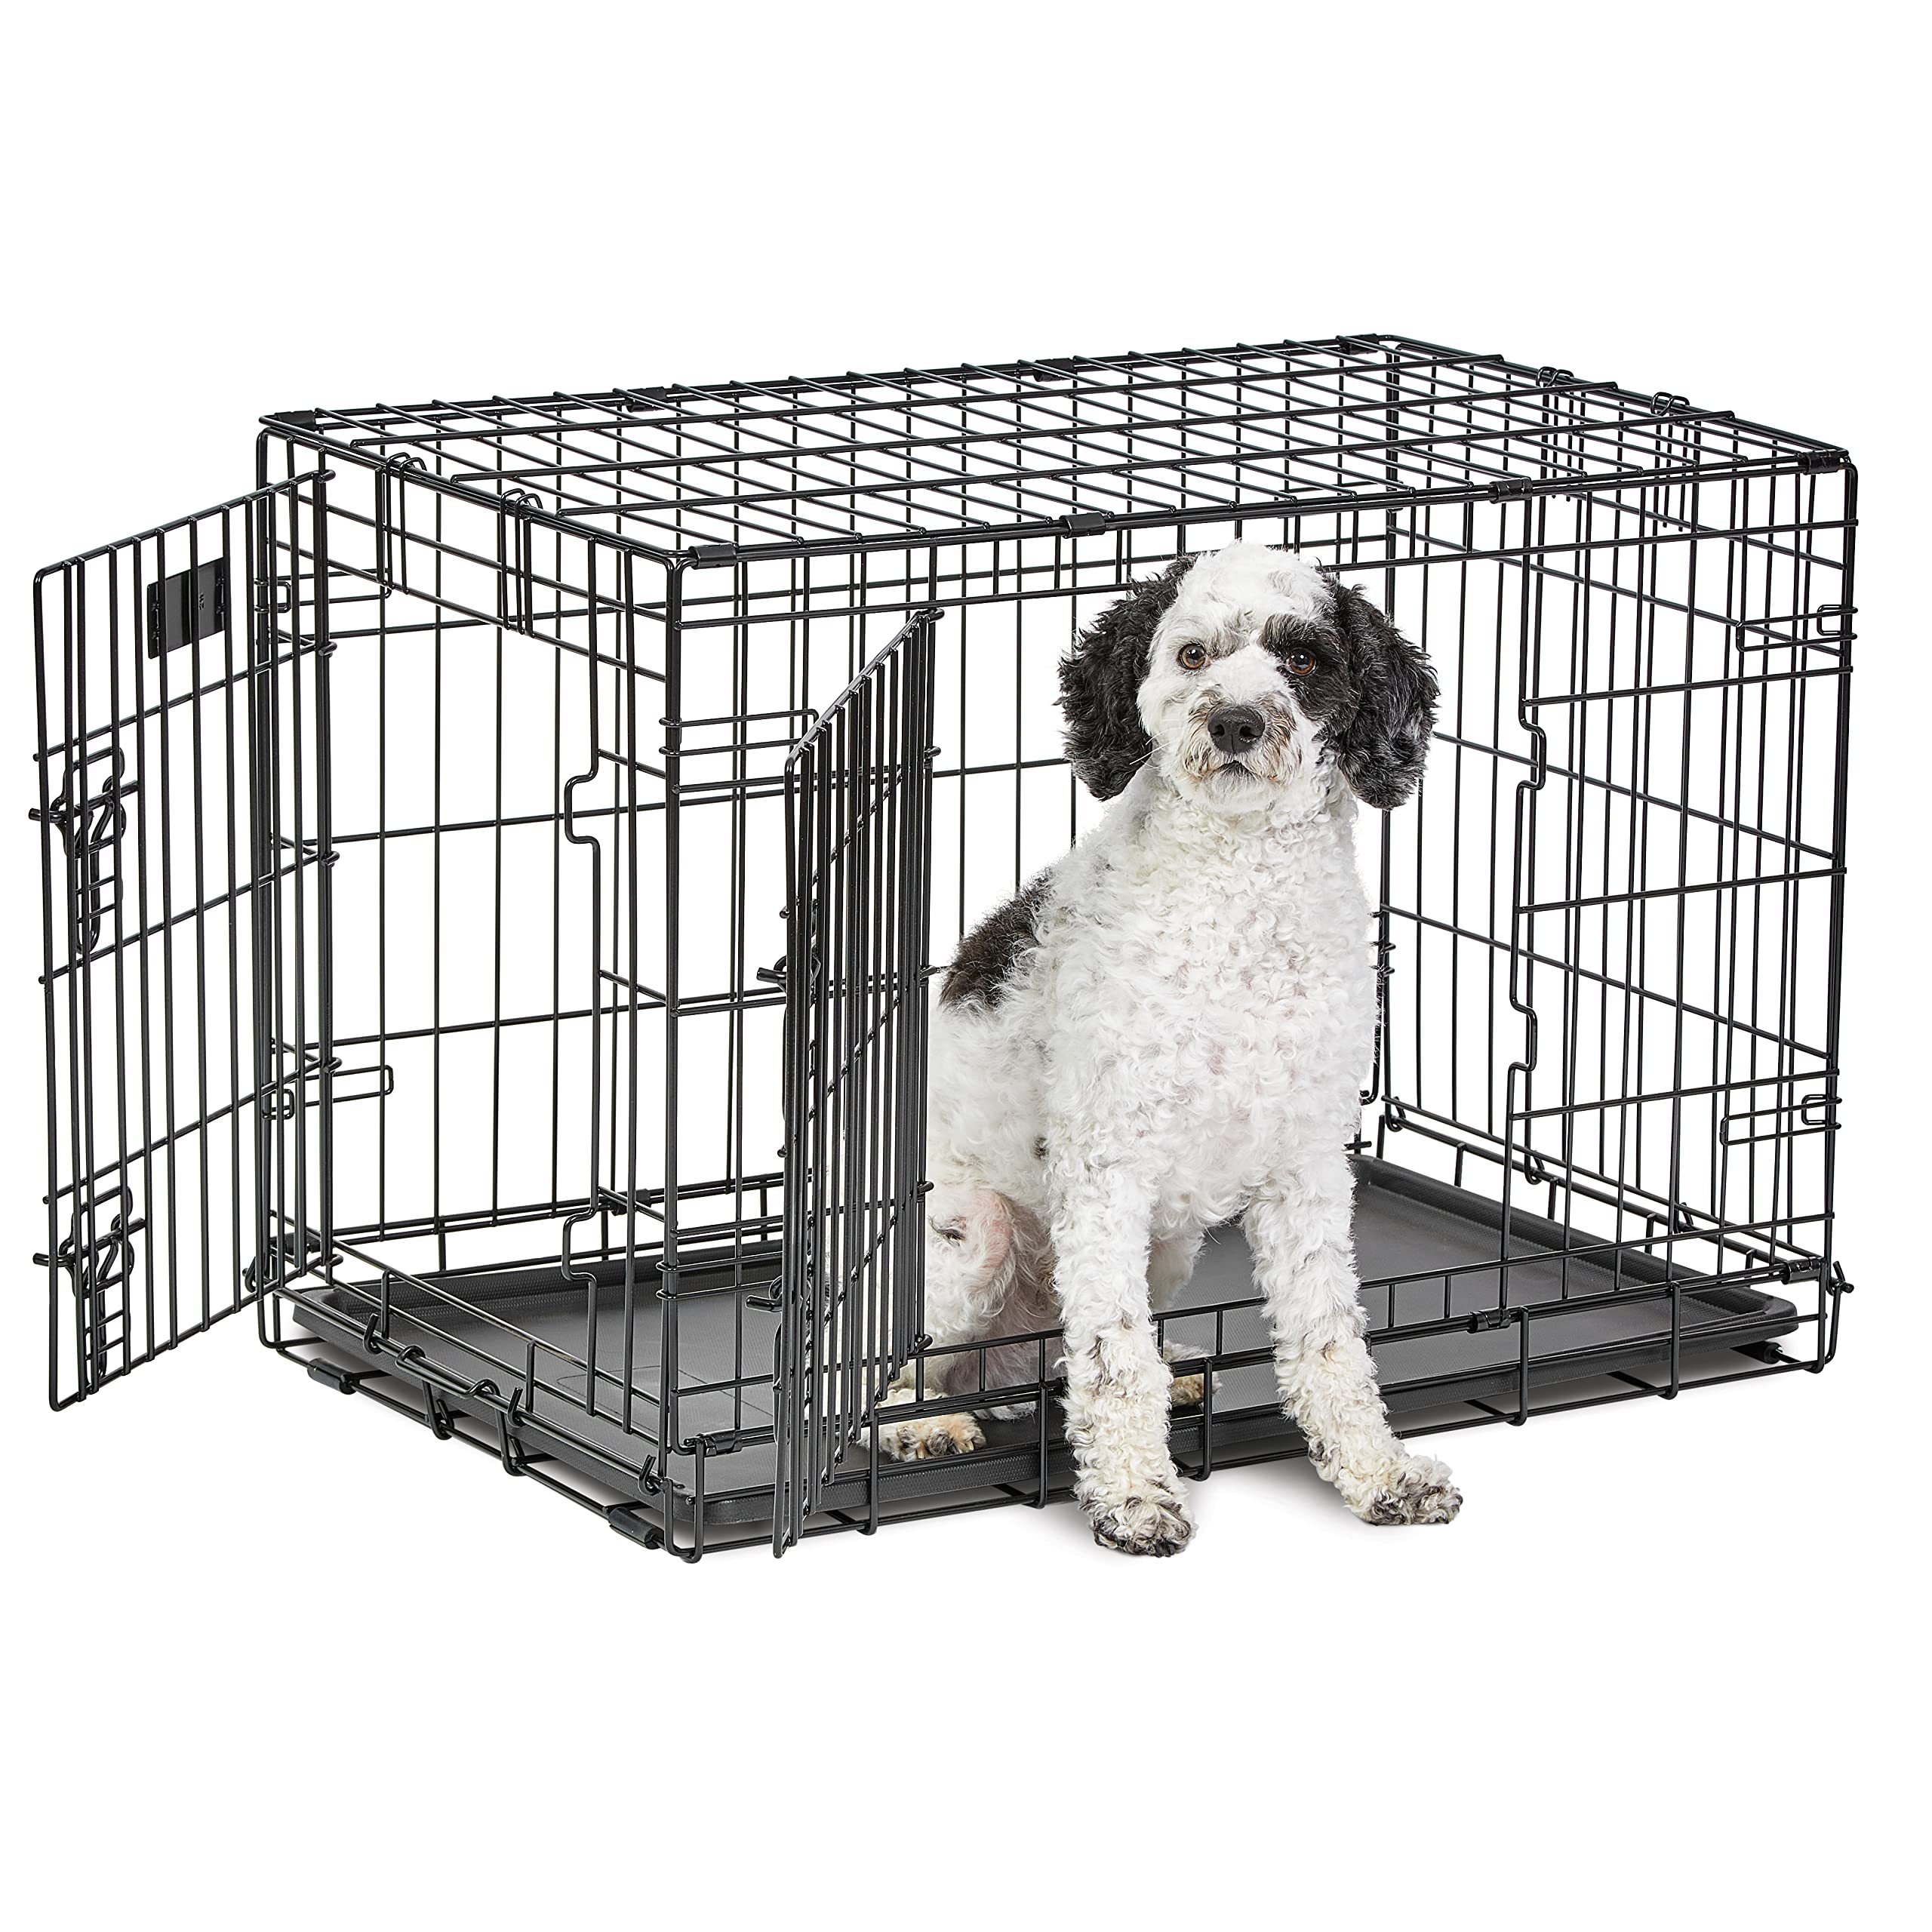 Book Cover MidWest Homes for Pets Medium Dog Crate | MidWest Life Stages 30' Double Door Folding Metal Dog Crate | Divider Panel, Floor Protecting Feet & Dog Pan | 30.6L x 19.3W x 21.4H Inches, Medium Dog Breed 30-Inch Double Door Dog Crate